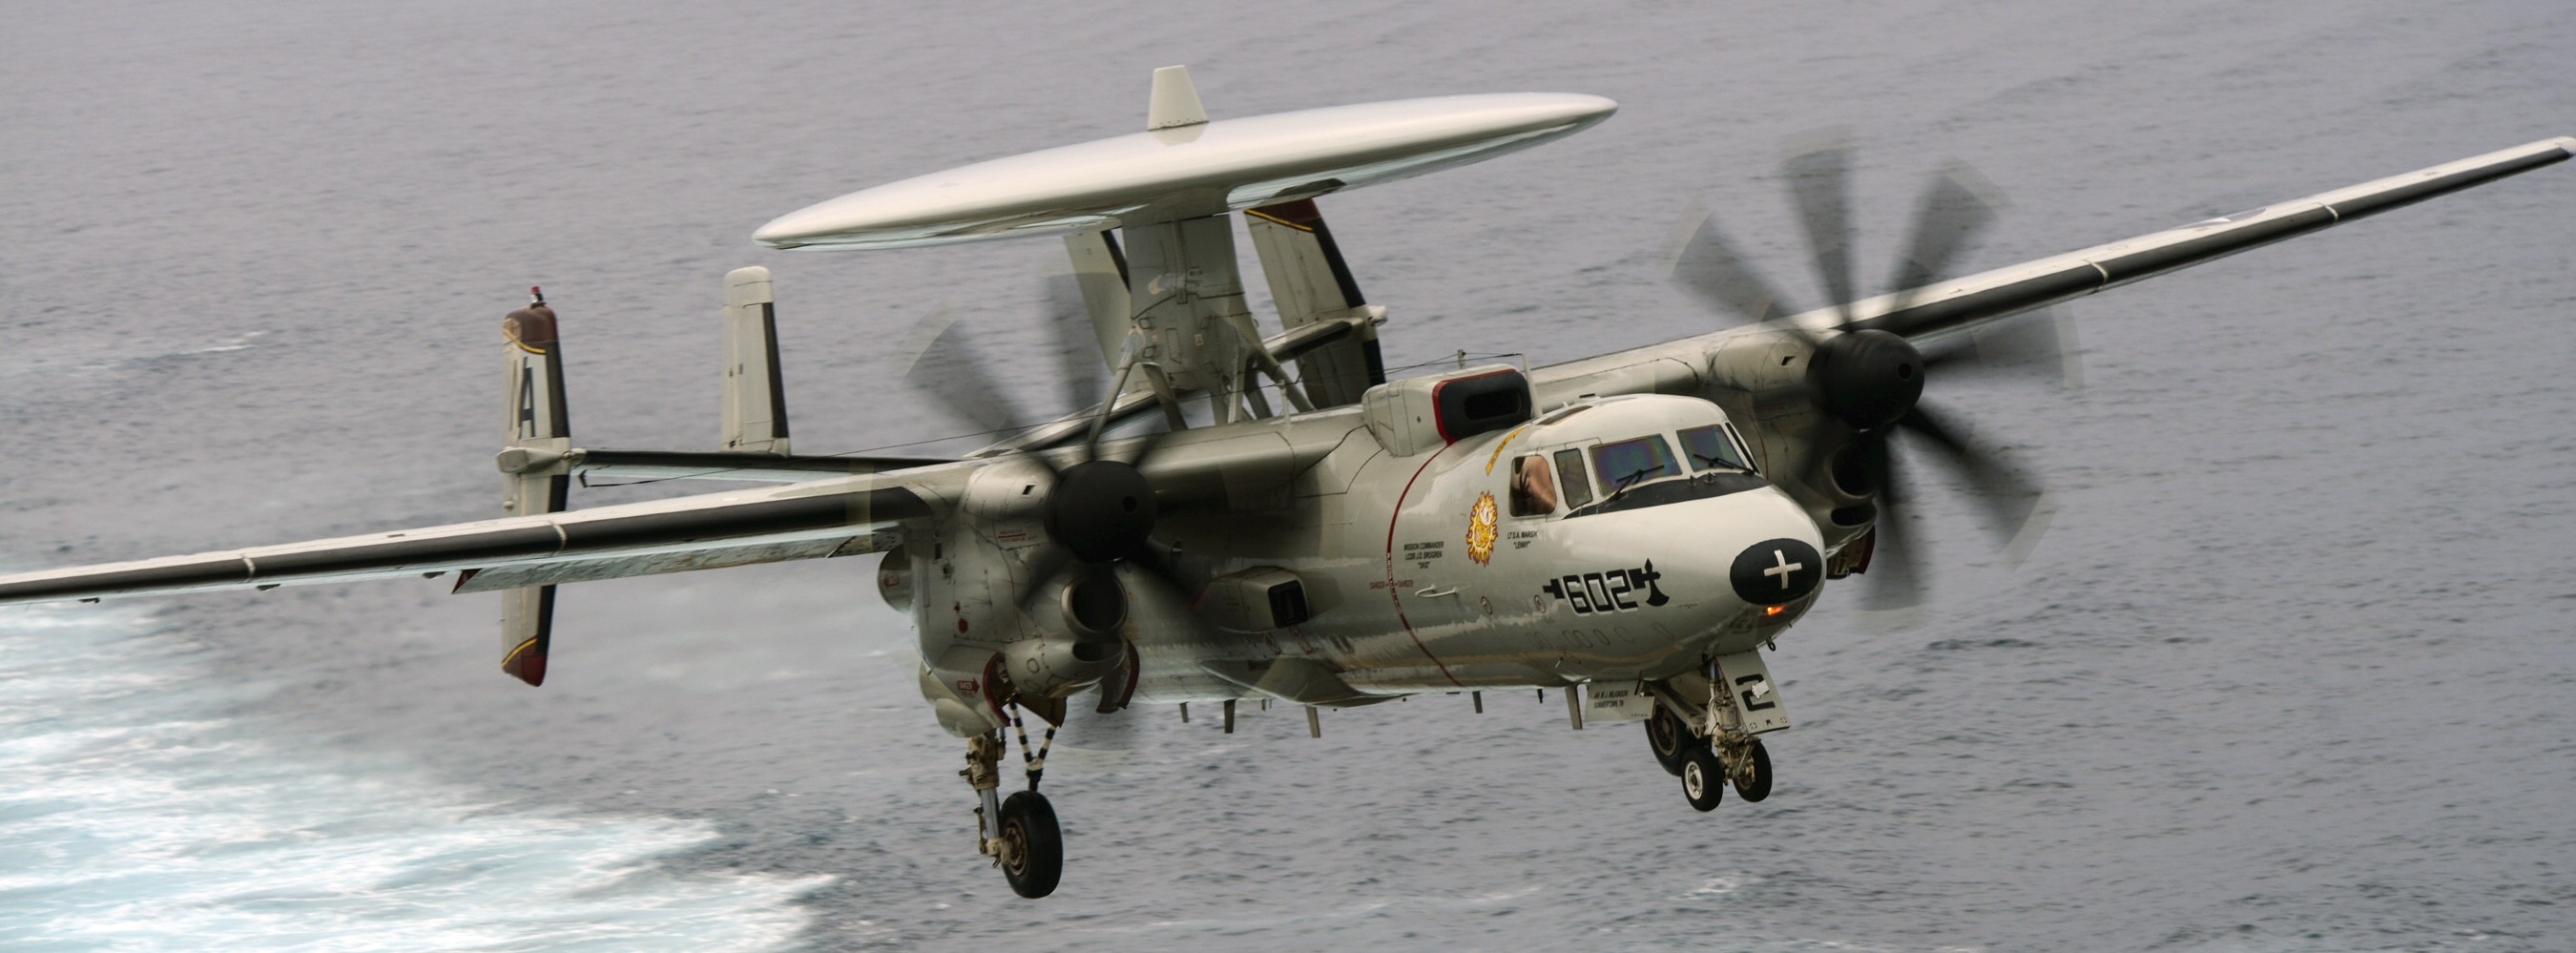 vaw-116 sun kings airborne command control squadron carrier early warning cvw-17 uss carl vinson cvn-70 37